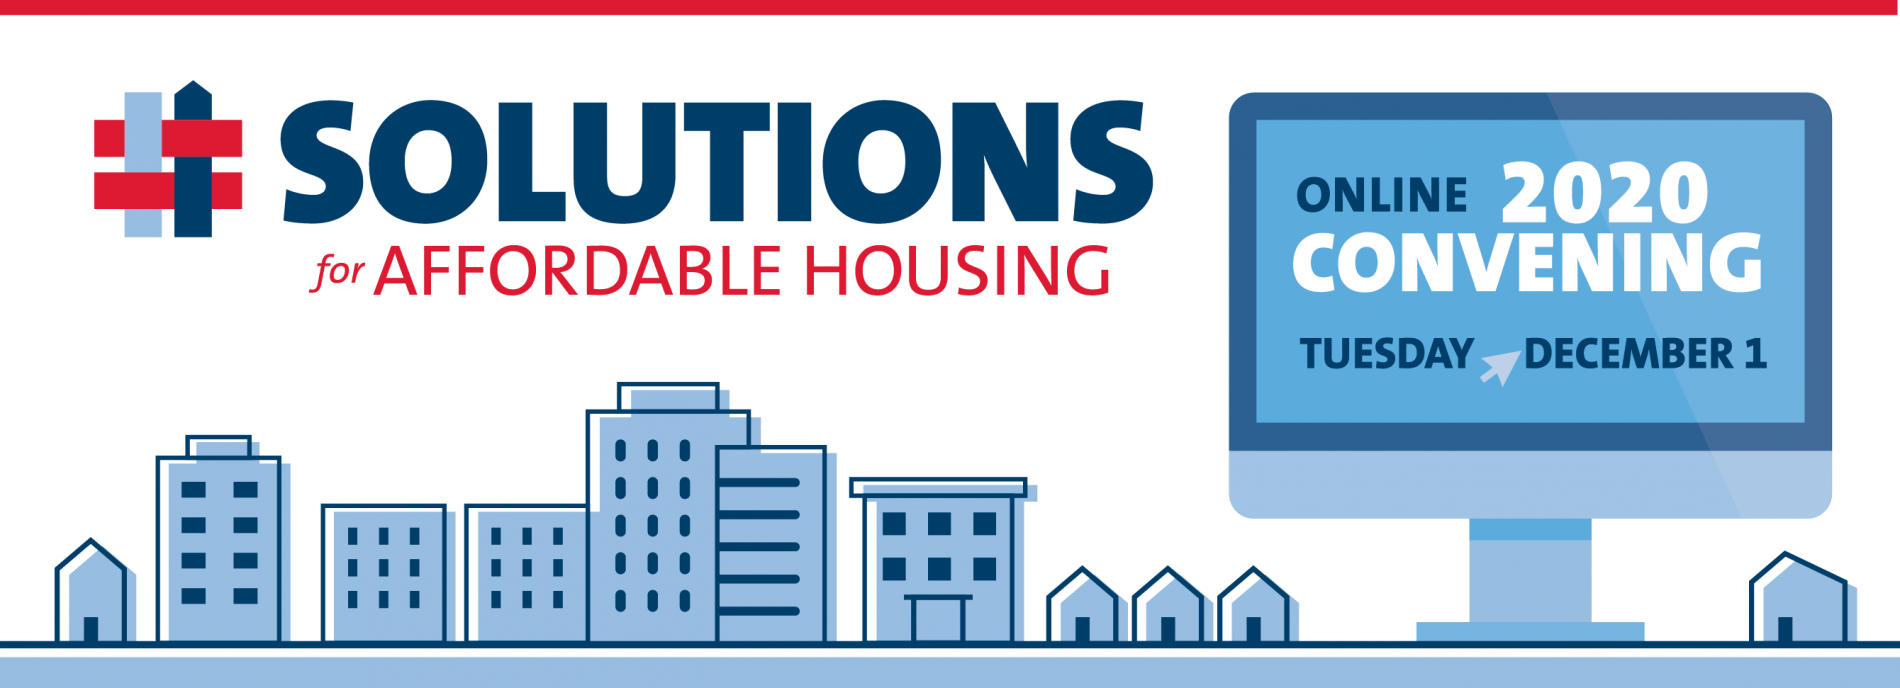 Solutions for Affordable Housing Online Convening PACDC